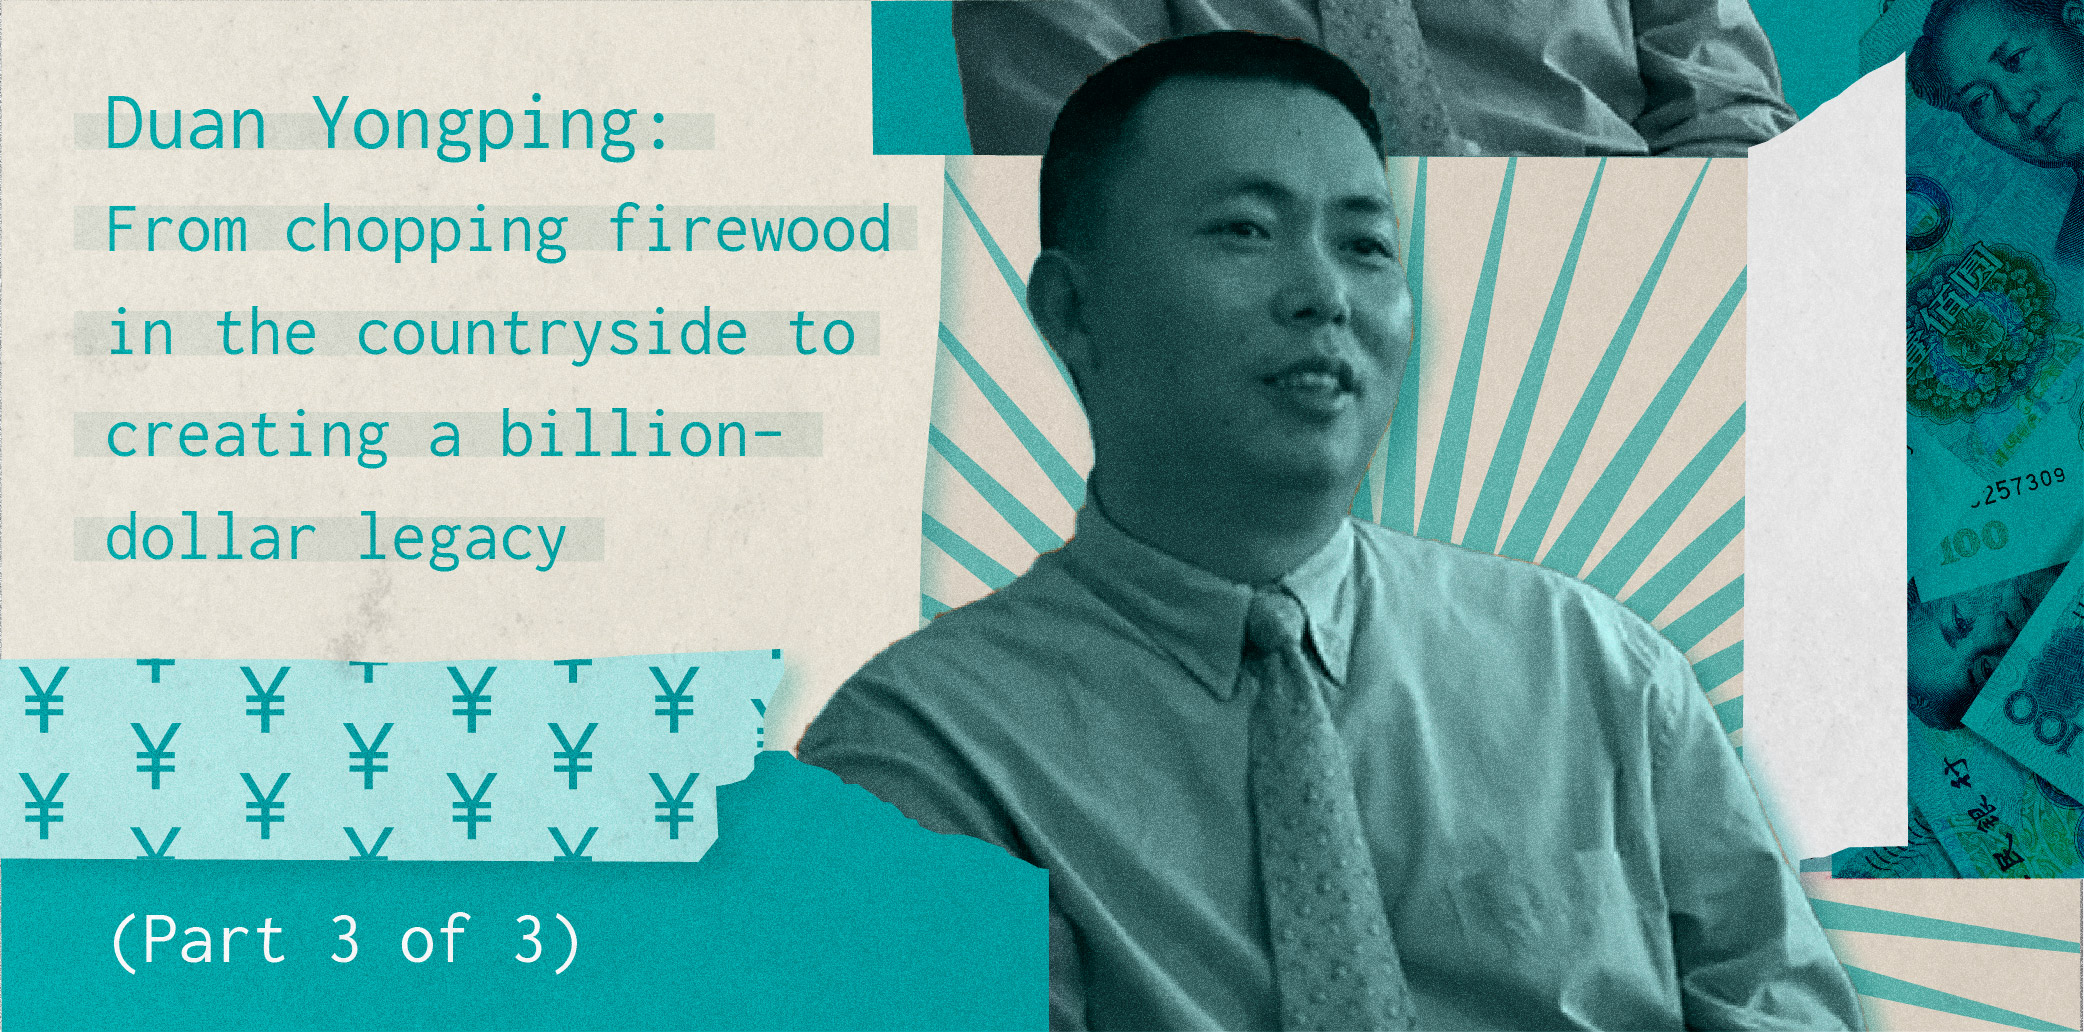 Duan Yongping: From chopping firewood in the countryside to creating a billion-dollar legacy (Part 3 of 3)